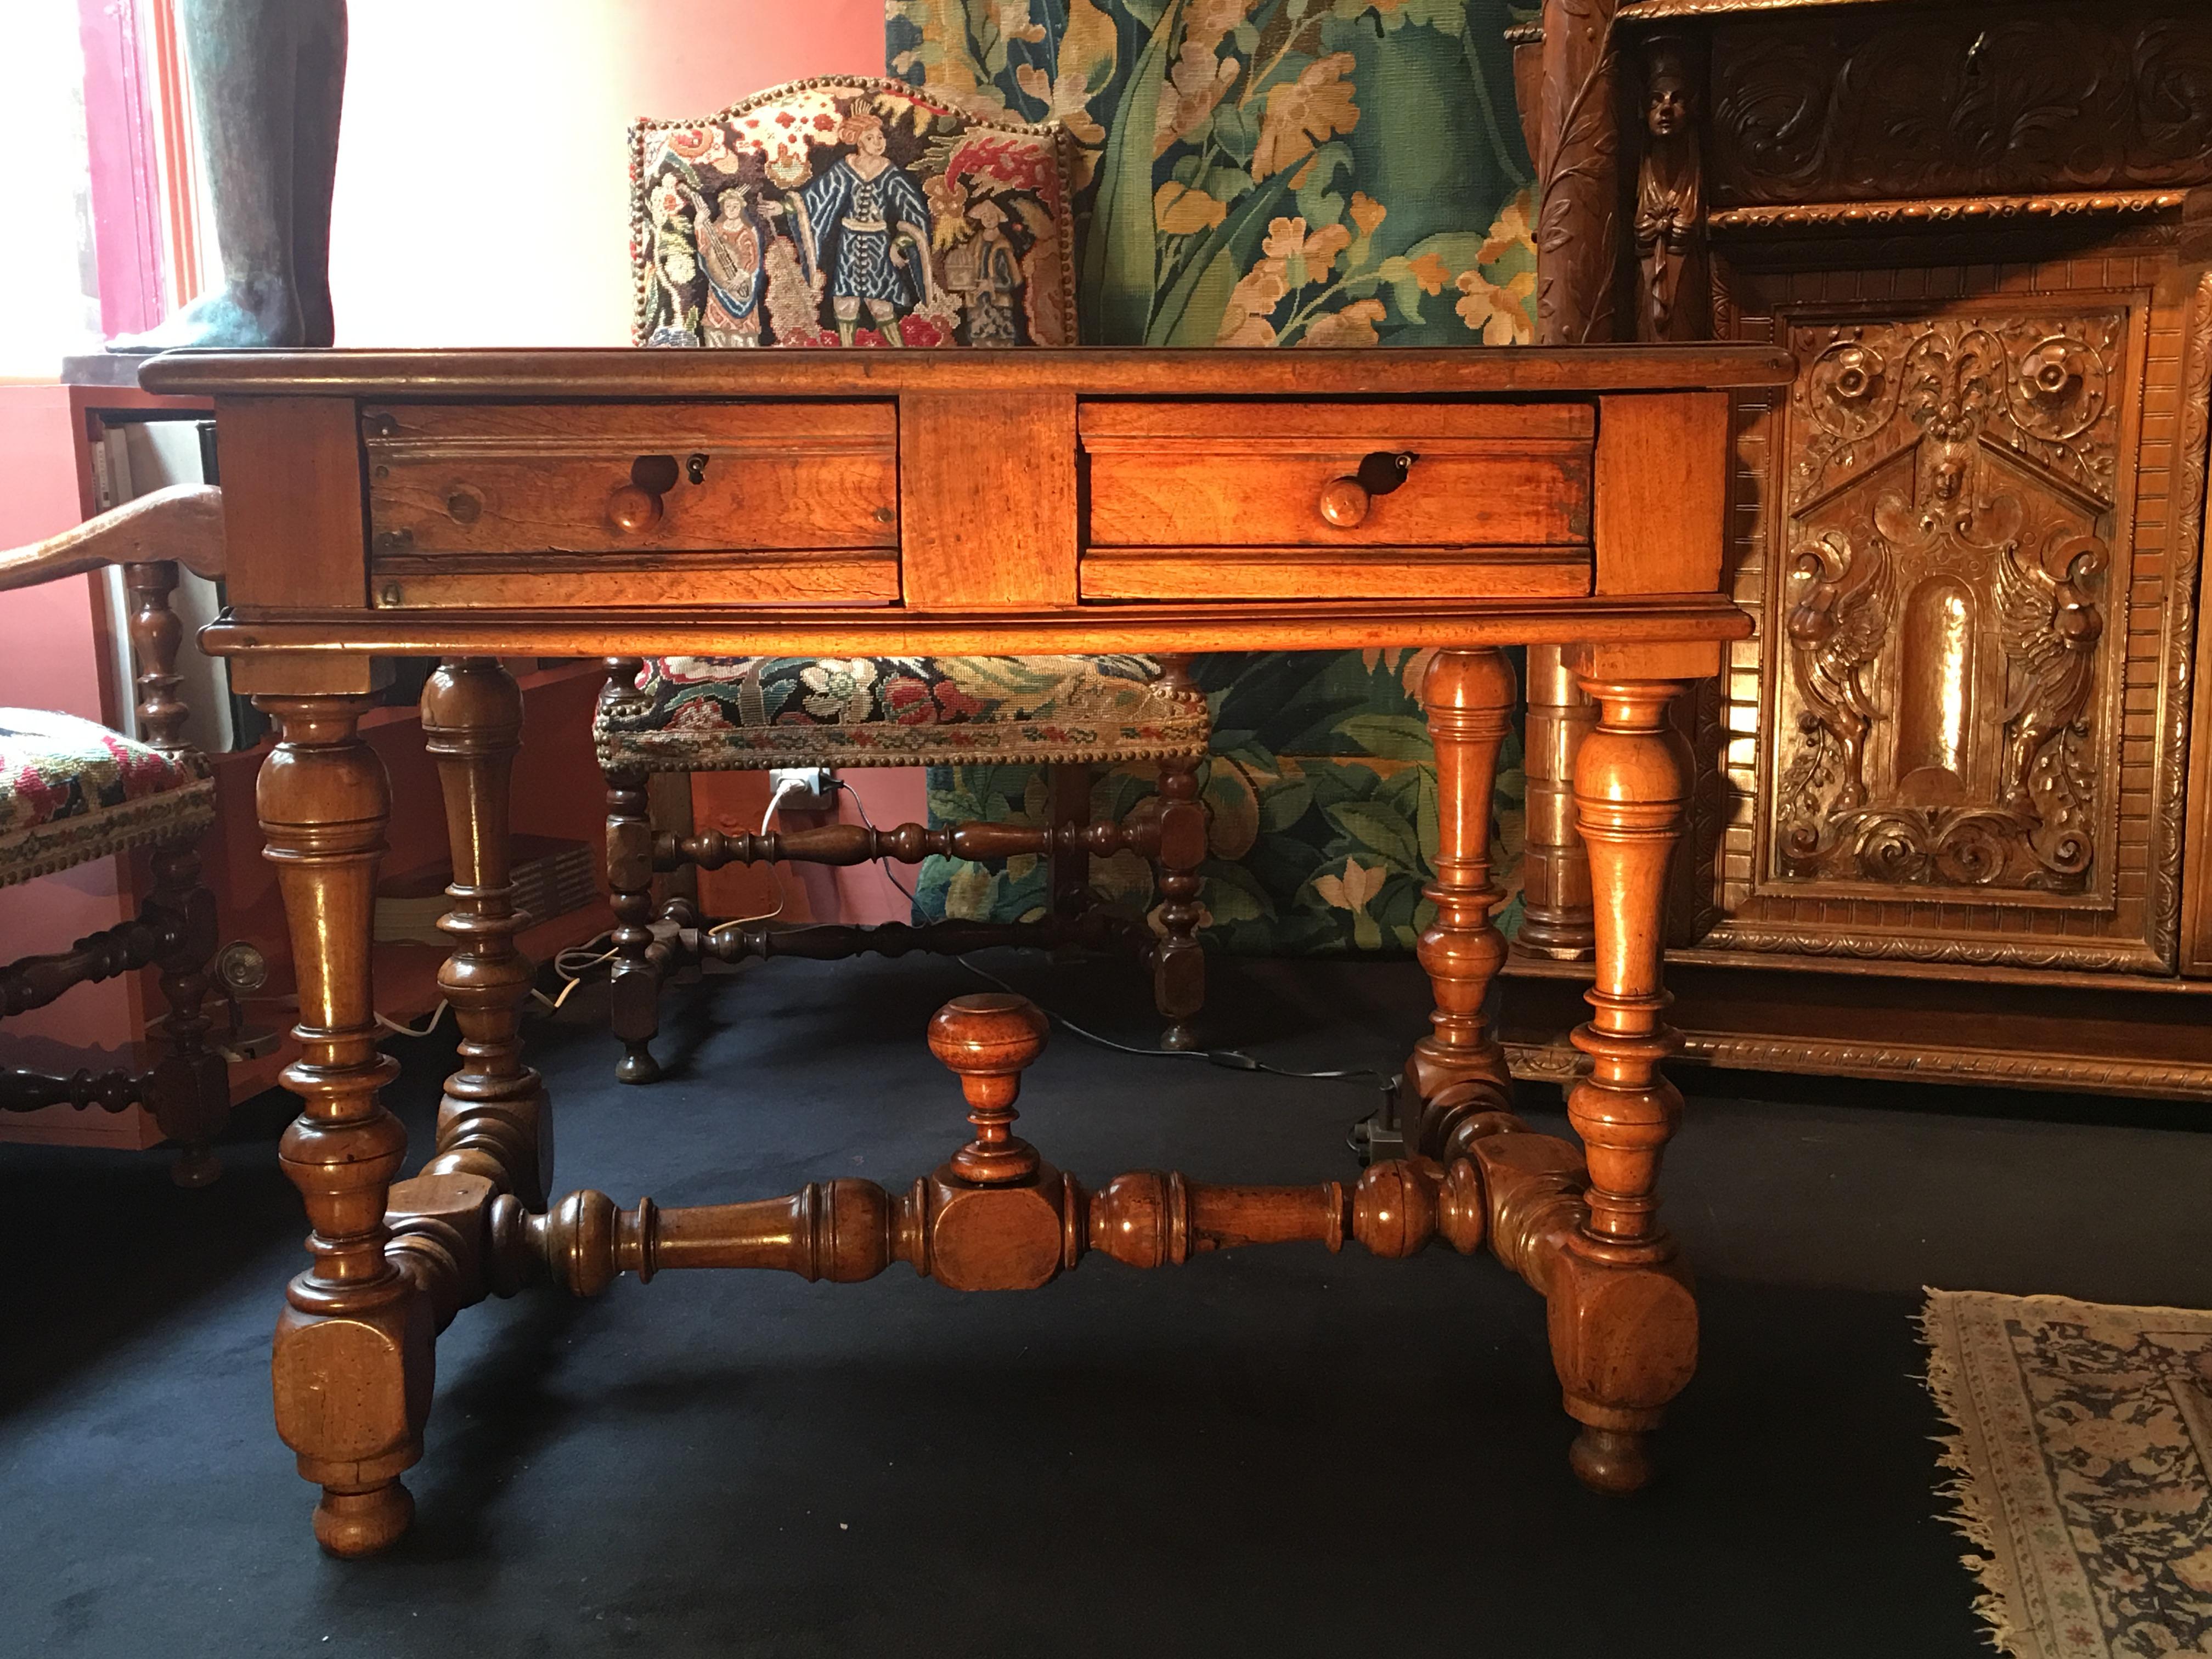 Origin : France, Burgundy
Period : 17th century

Height 73 cm
Length 93 cm
Depth 60.5 cm

Light colored walnut

This table-desk shows simple lines and a refined making testifying of the French production during the last years of Louis XIII reign.